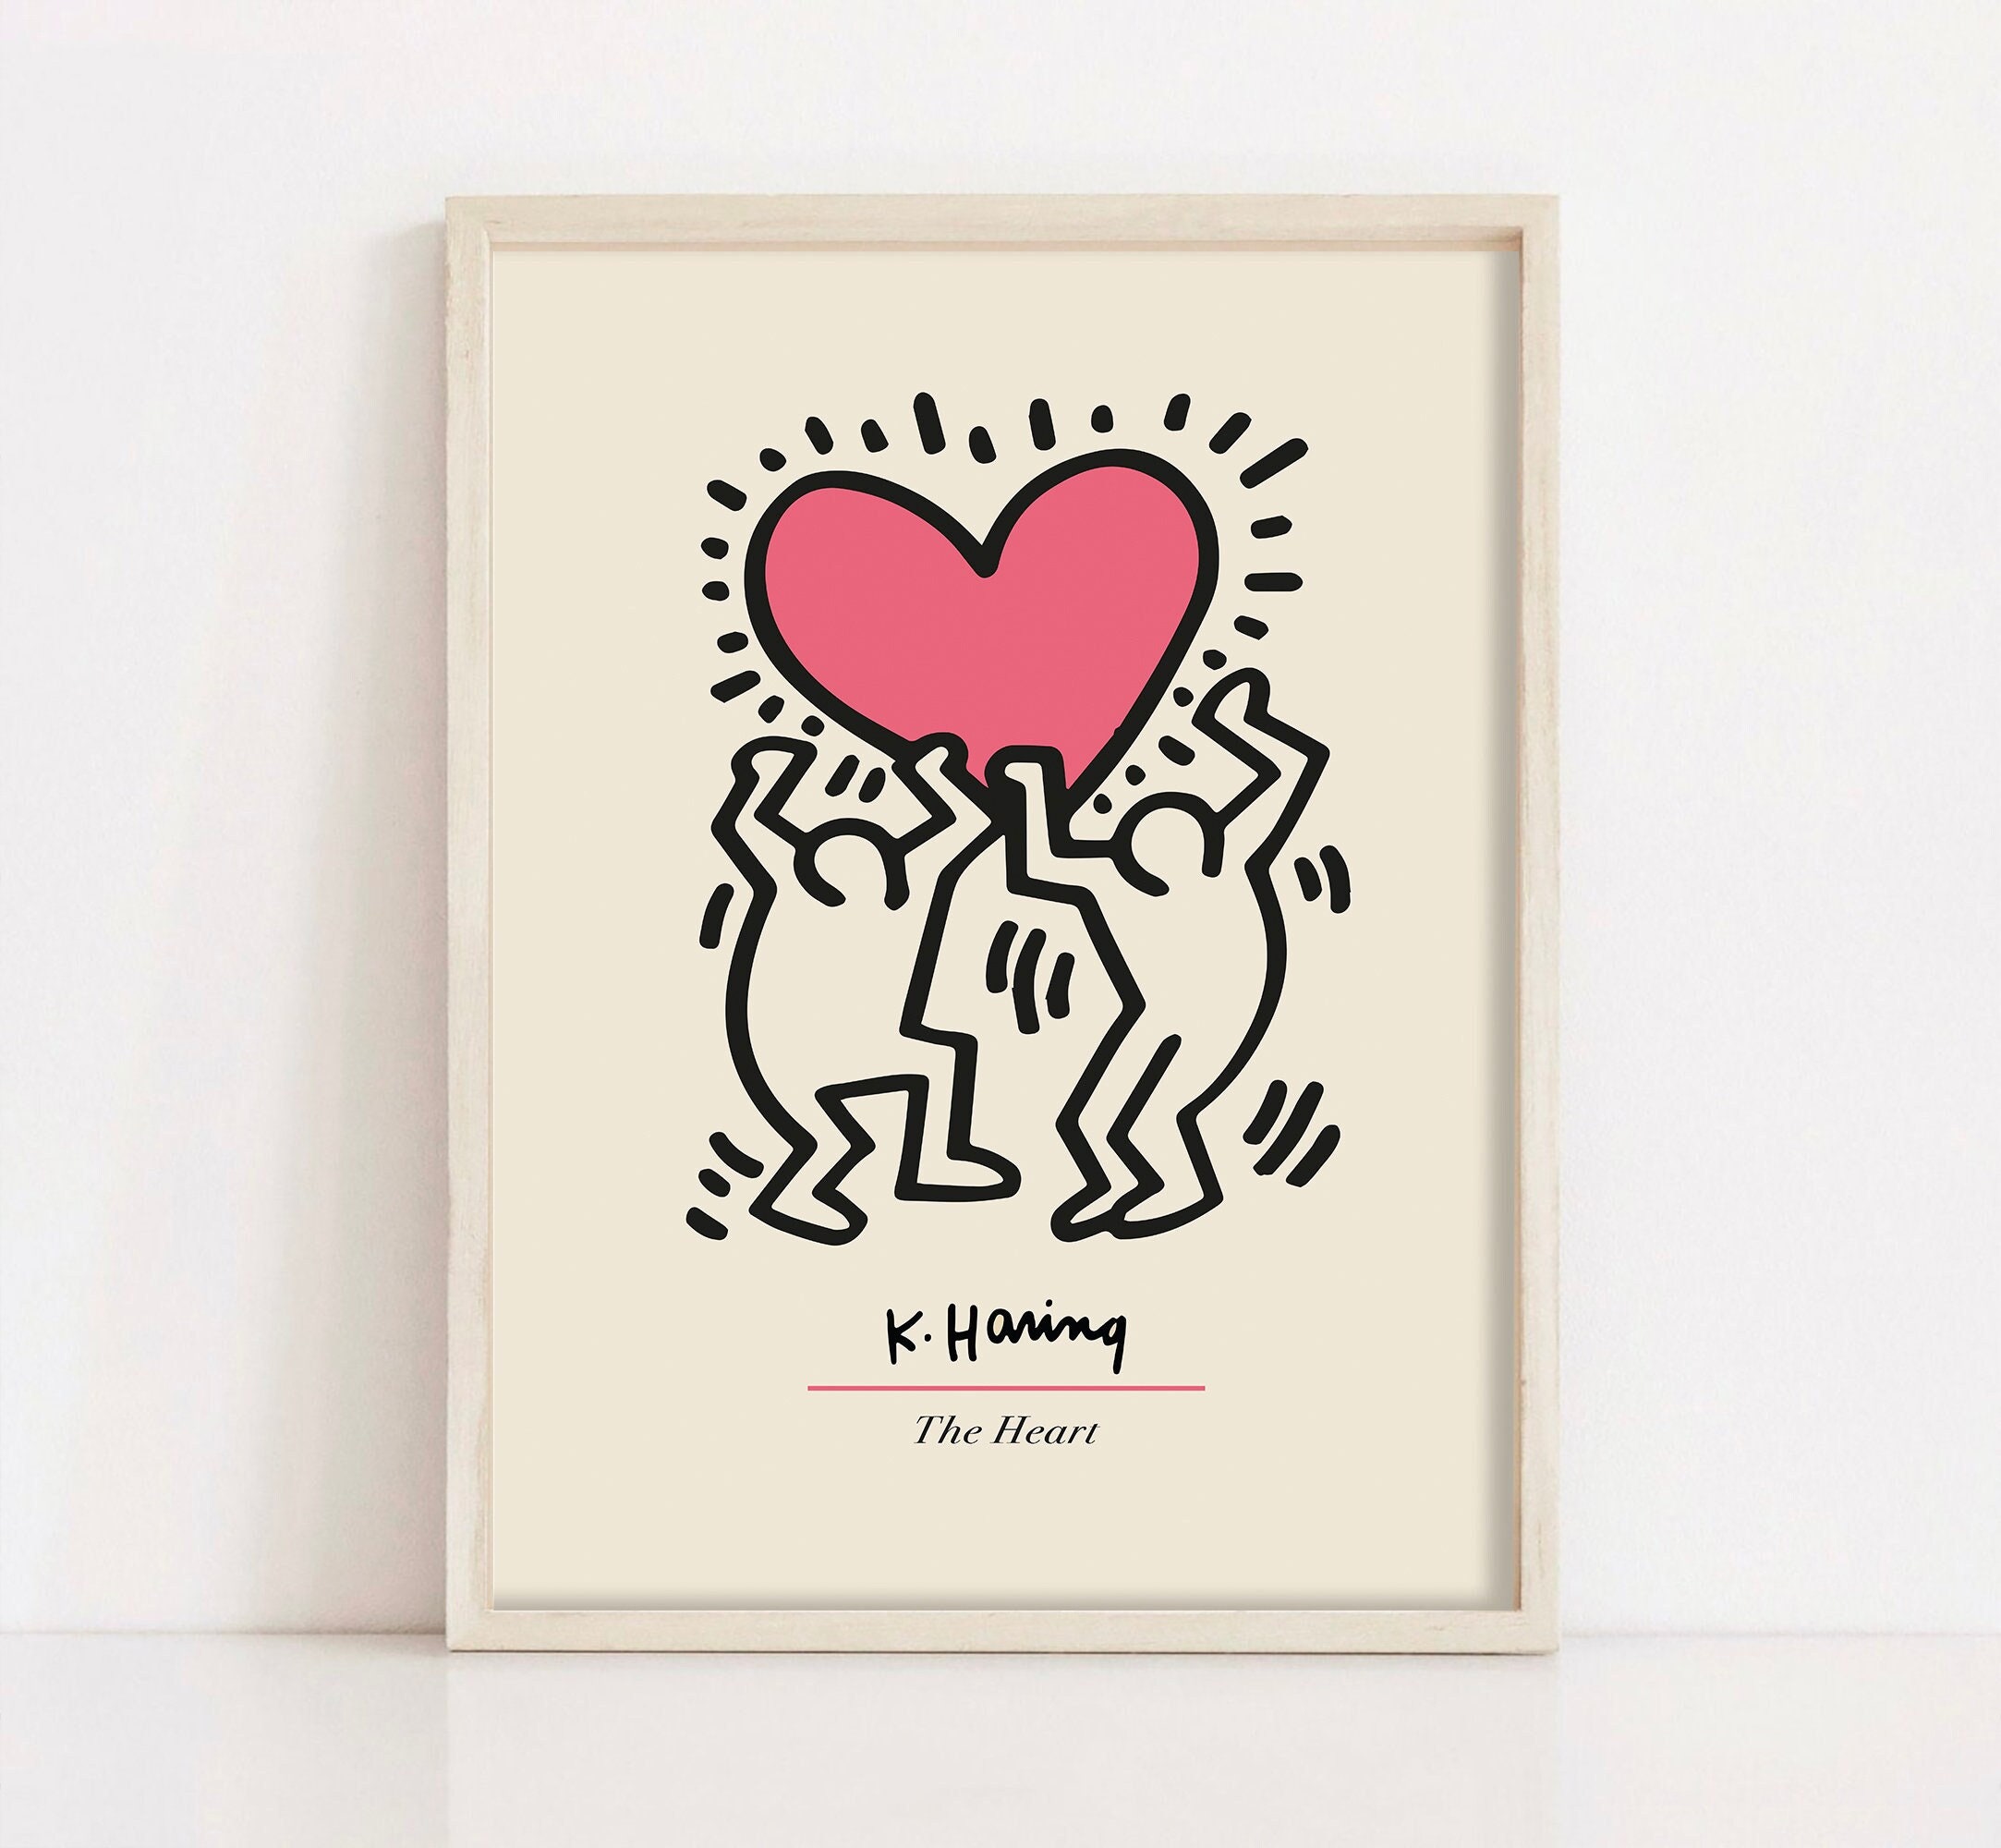 Keith Haring Flower 